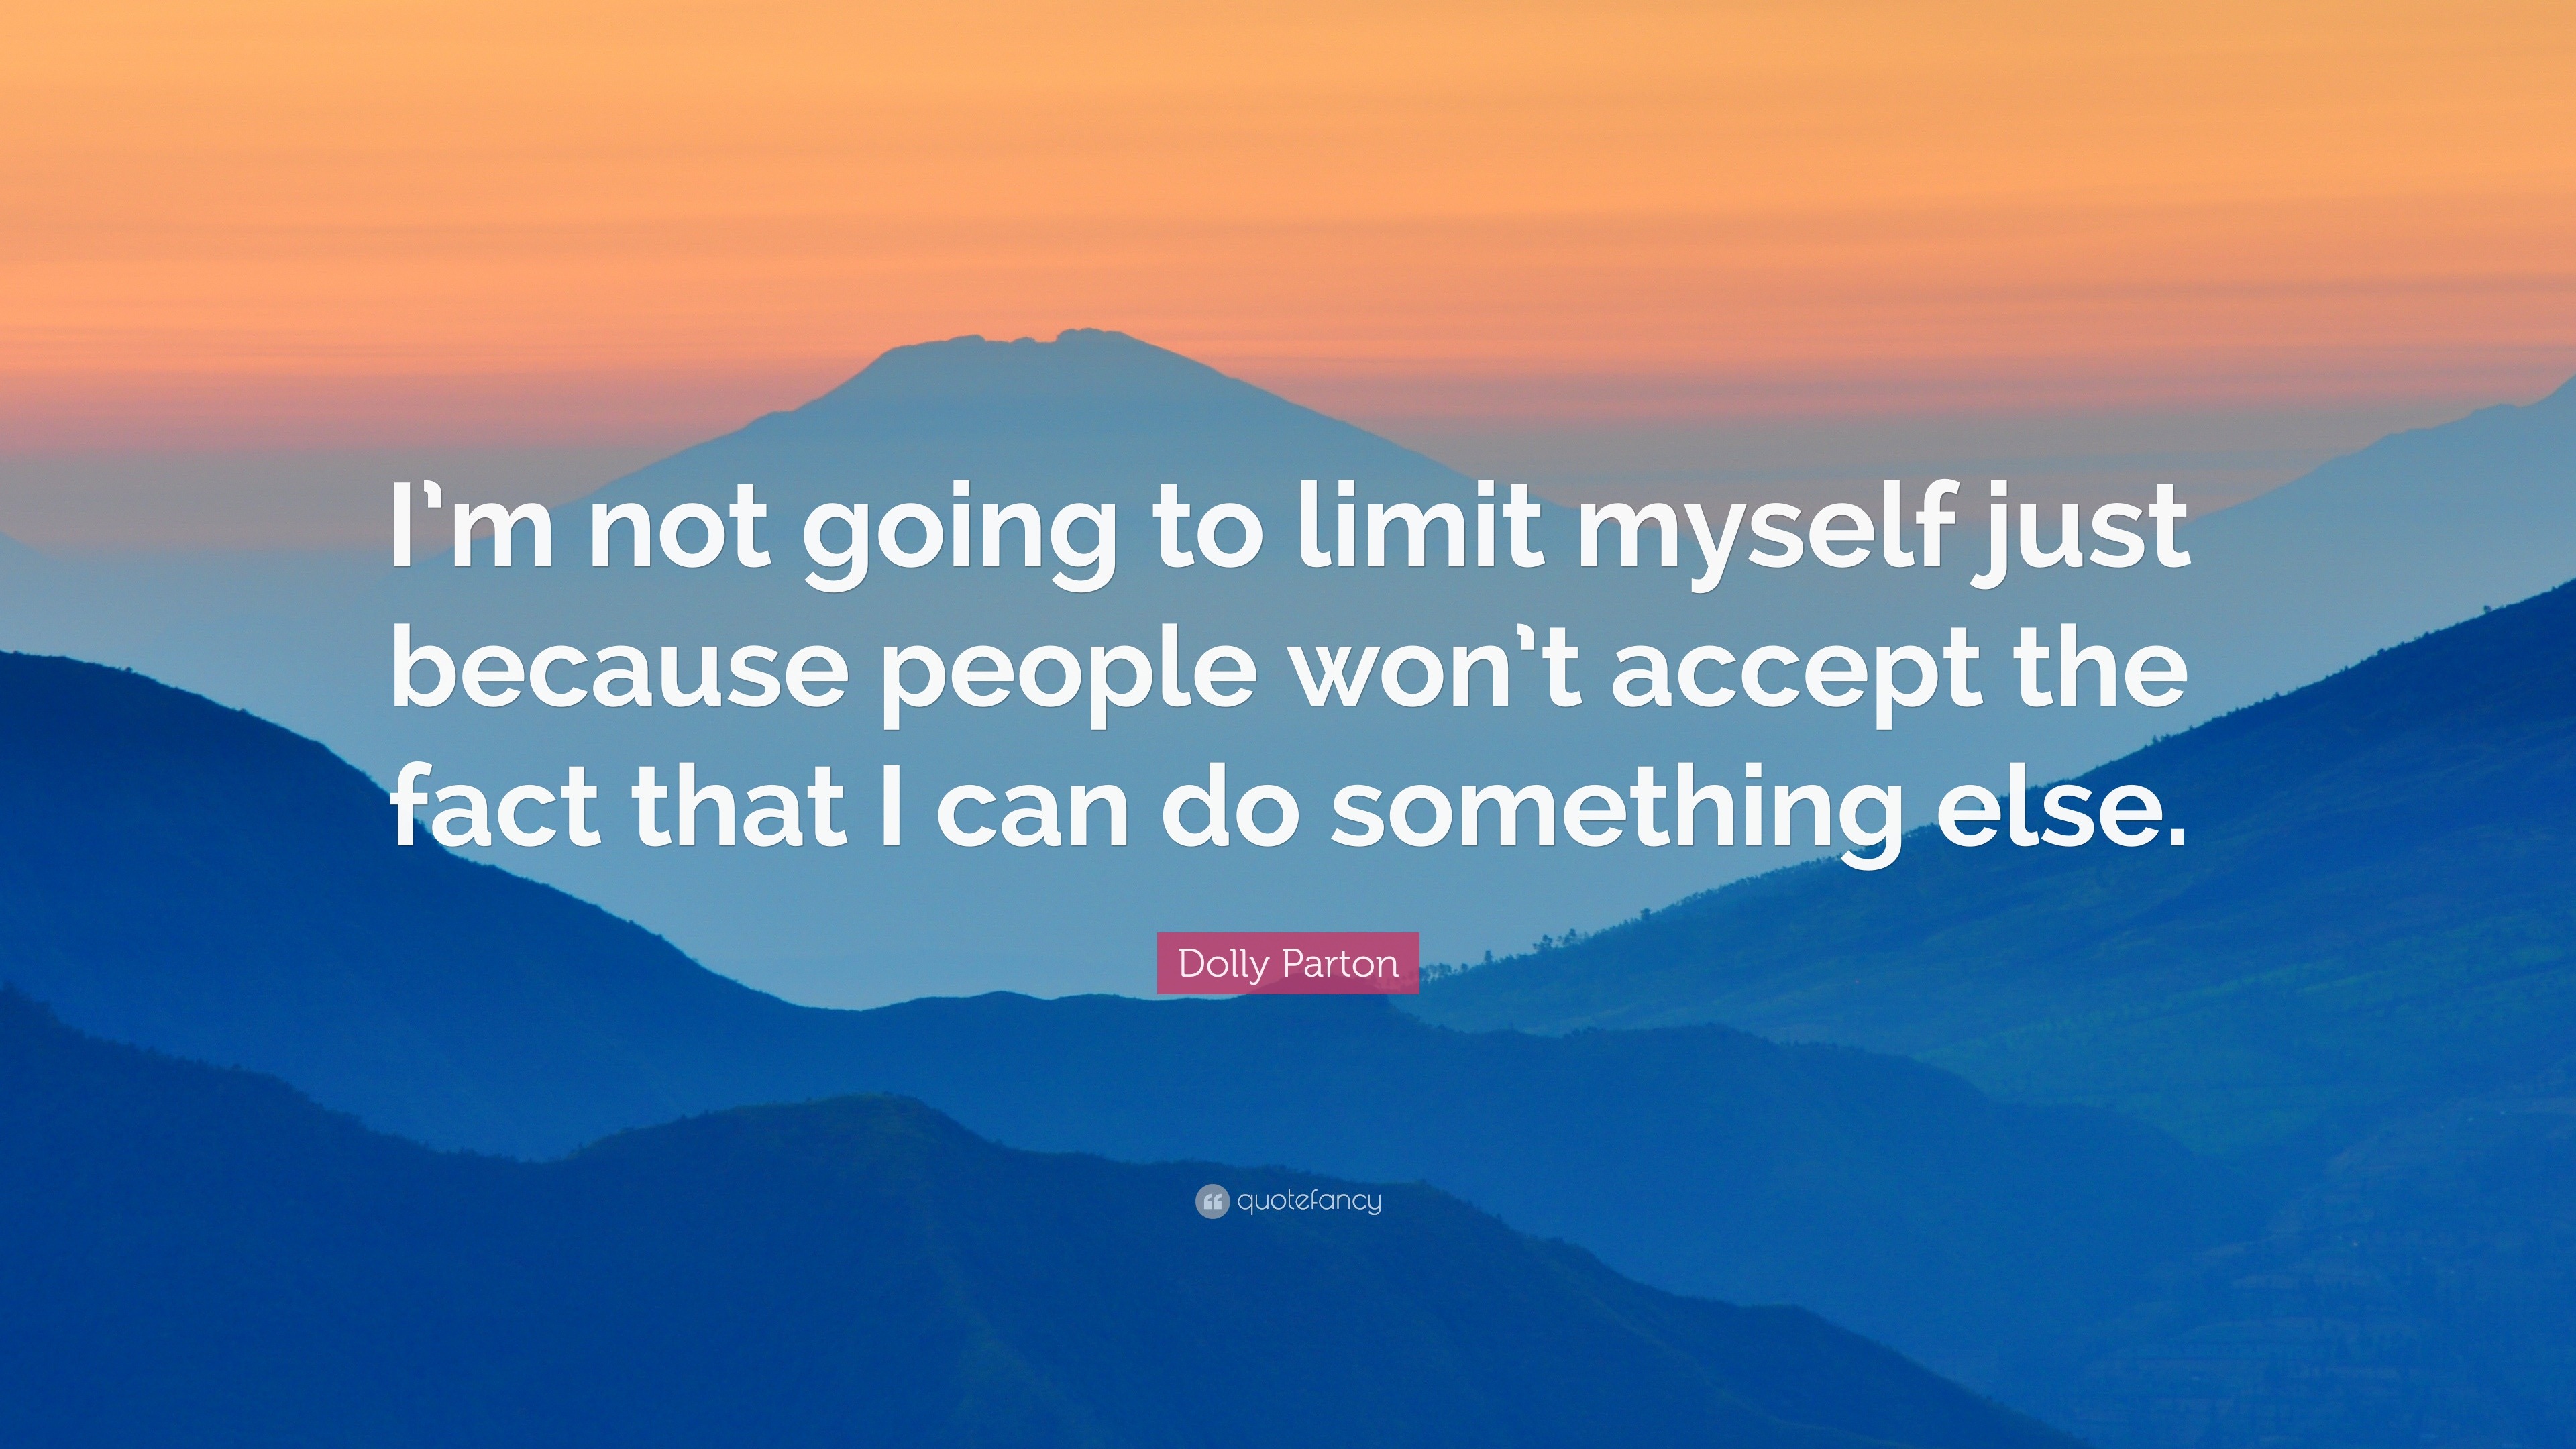 Dolly Parton Quote “im Not Going To Limit Myself Just Because People Wont Accept The Fact